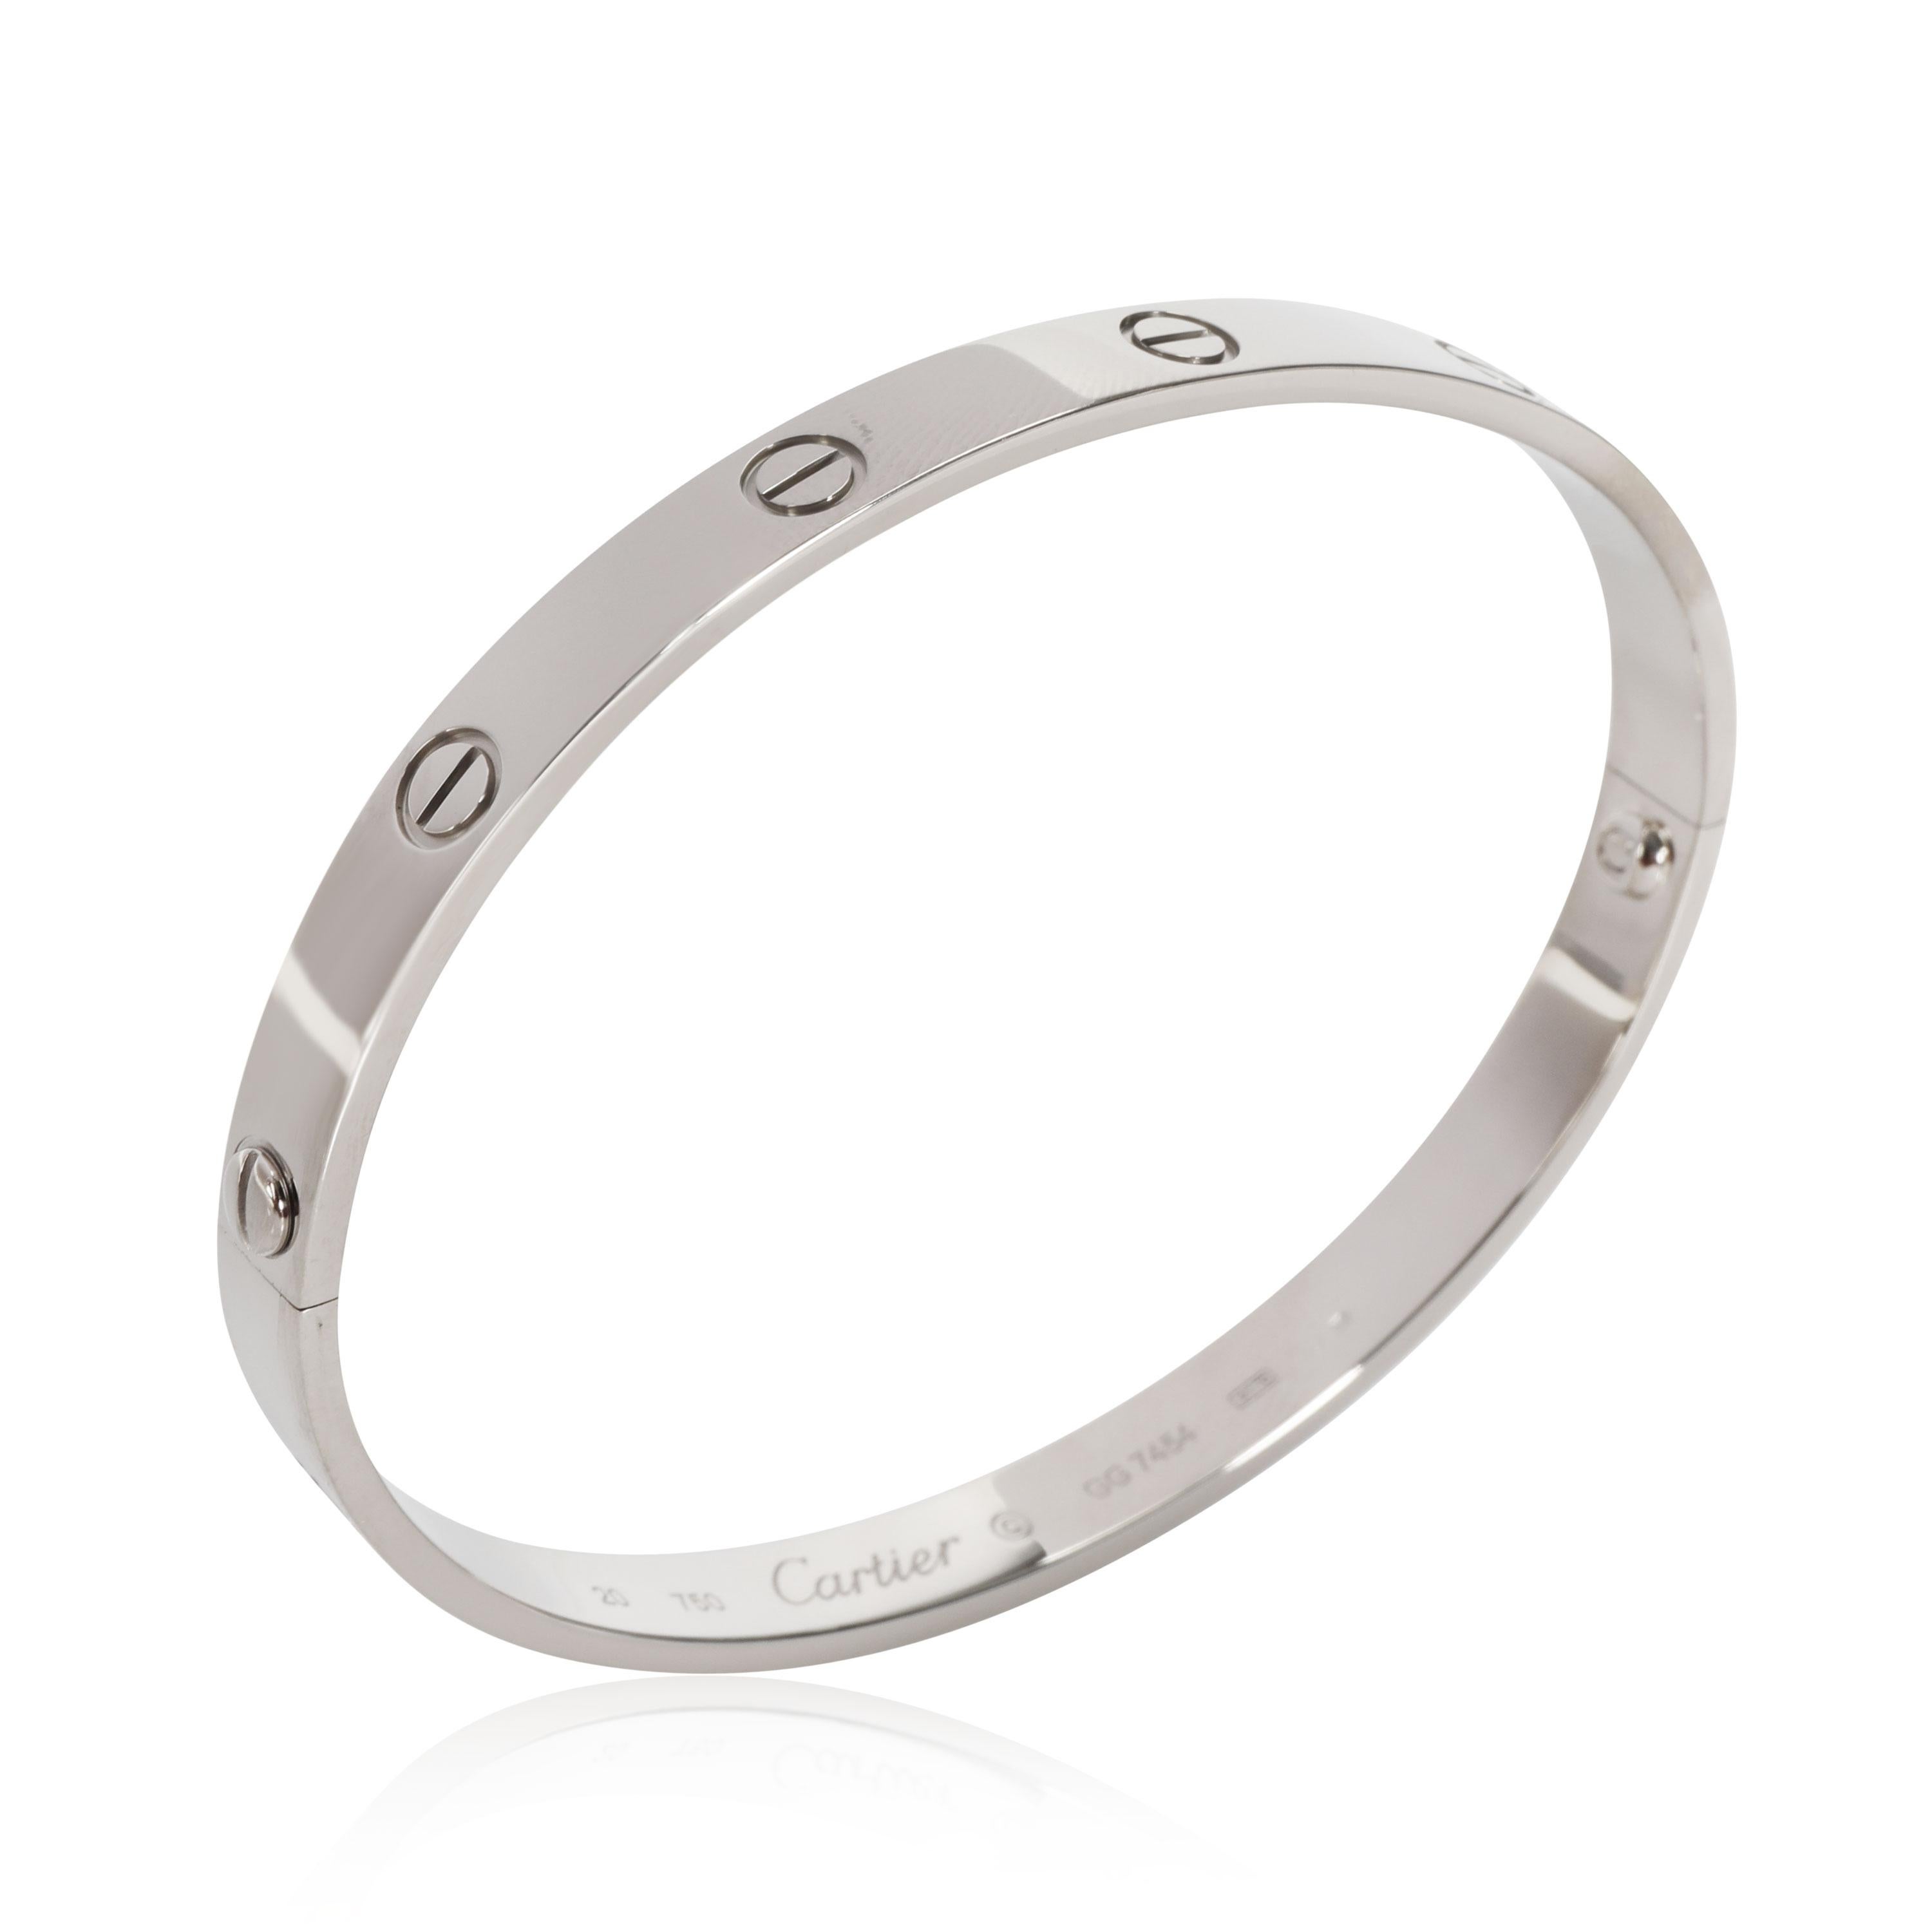 Cartier Love Bracelet in 18K White Gold

PRIMARY DETAILS
SKU: 111198
Listing Title: Cartier Love Bracelet in 18K White Gold
Condition Description: Retails for 7,400 USD. In excellent condition and recently polished. Cartier size 20. Comes with